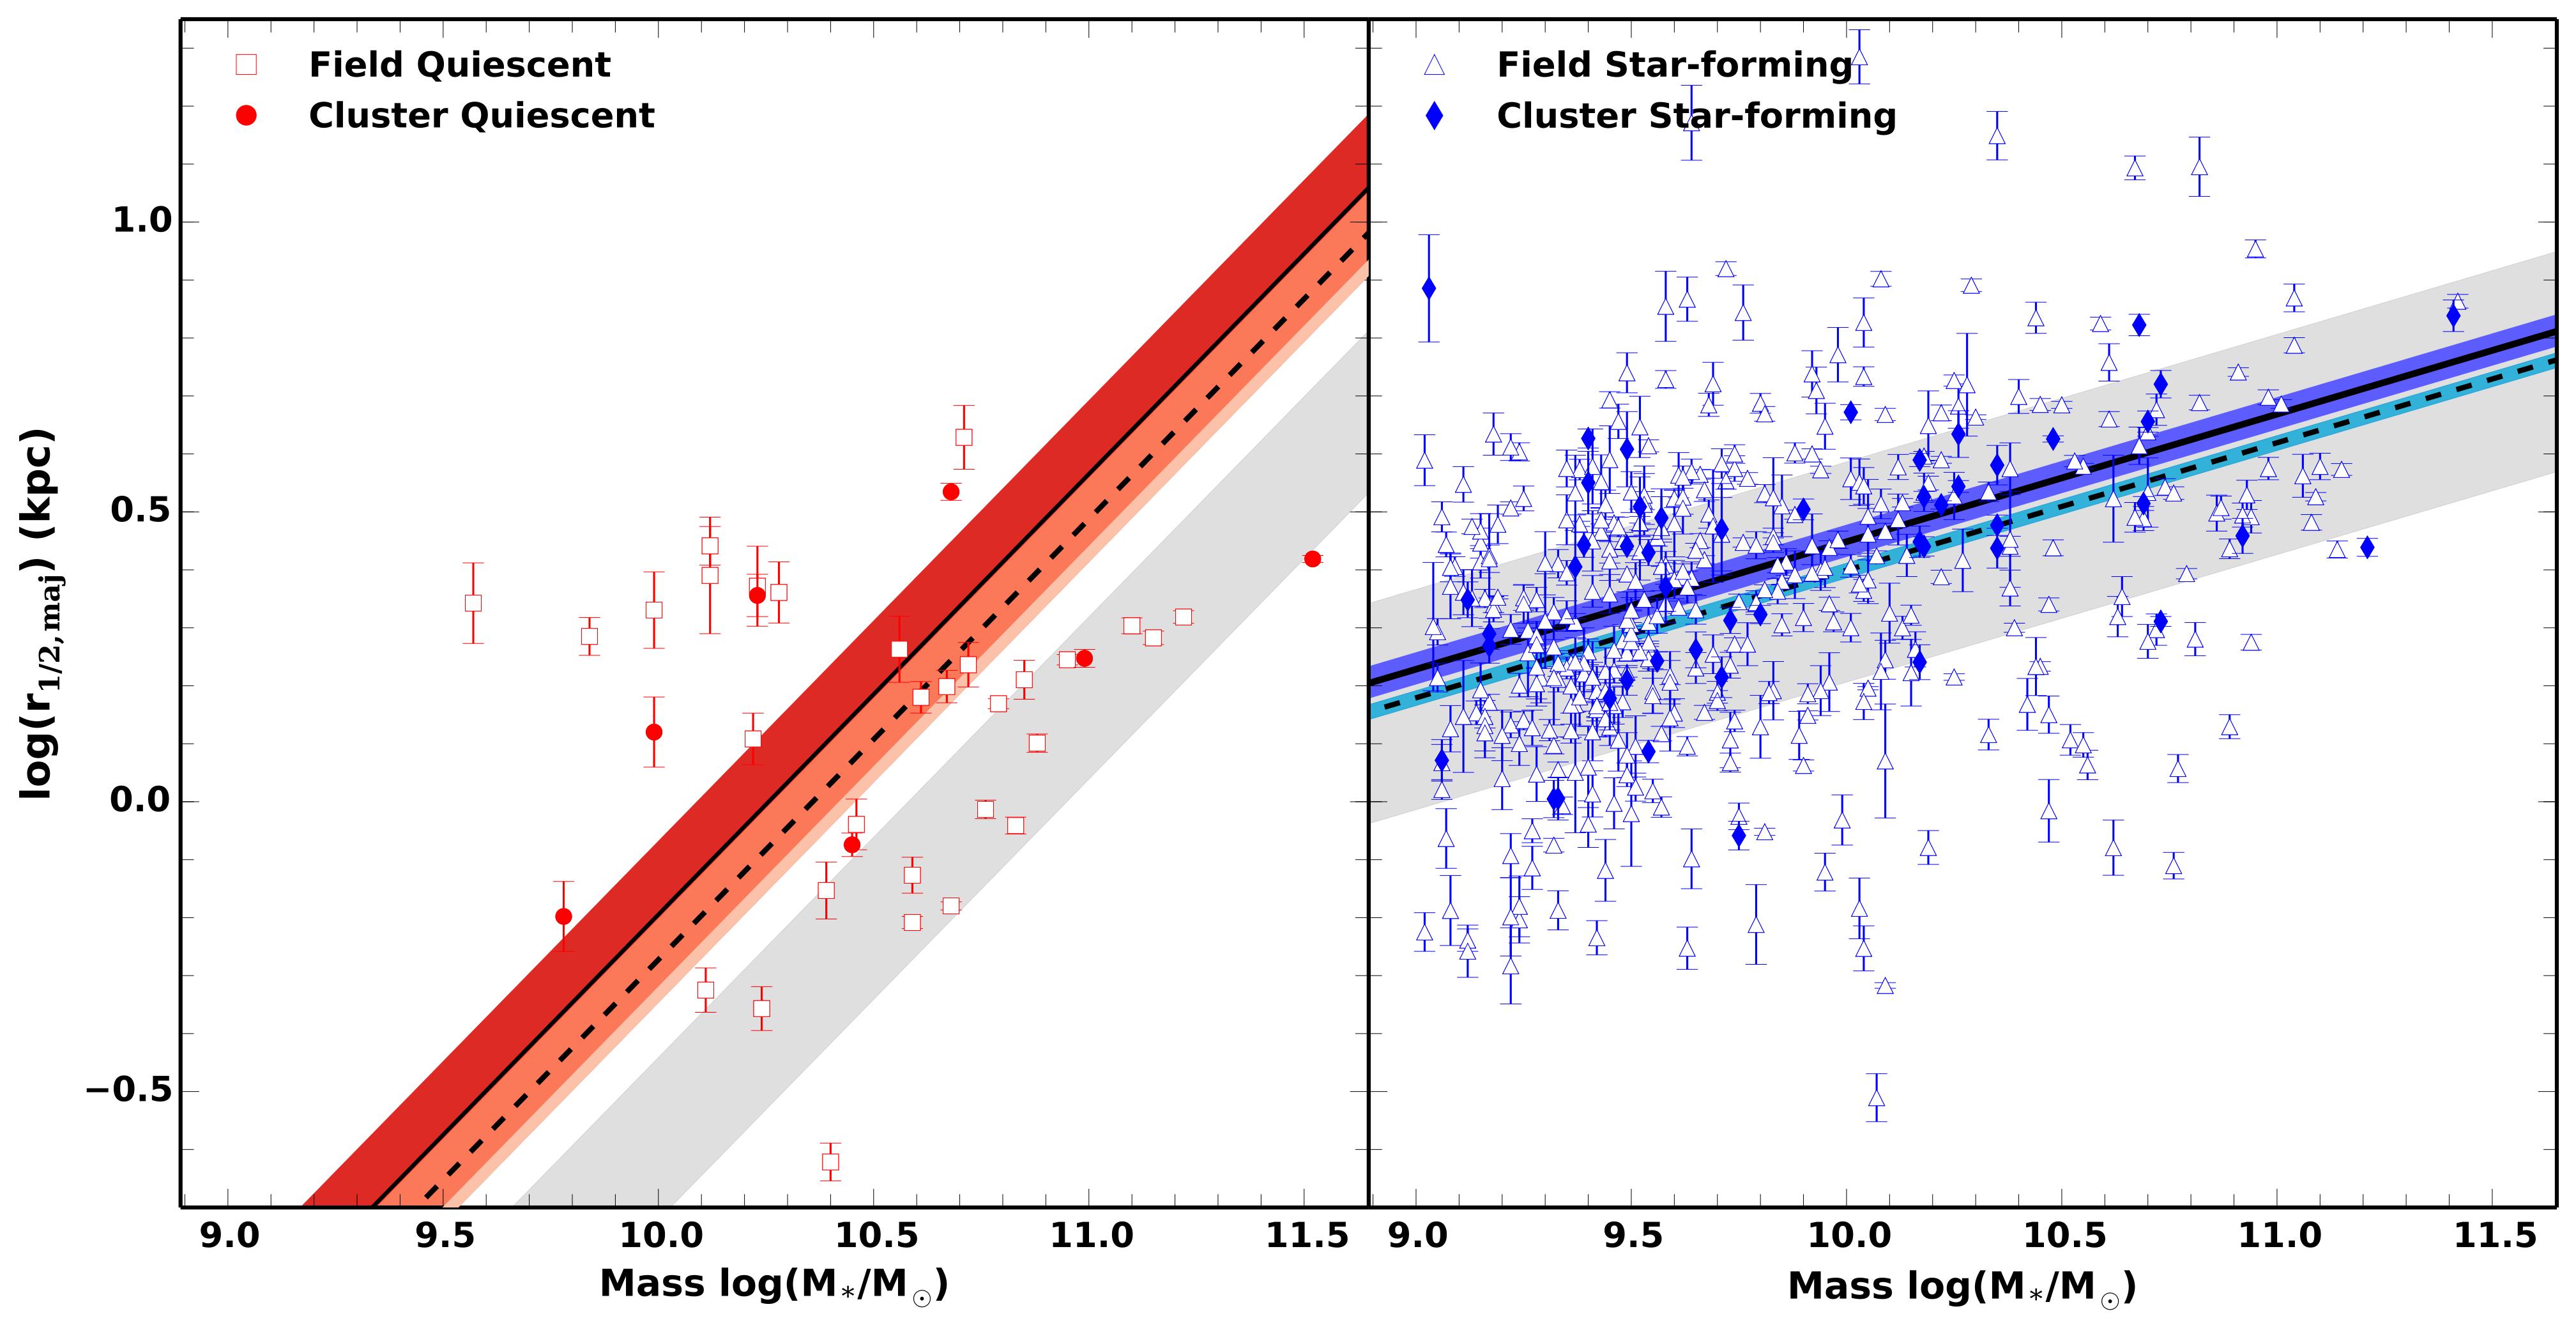 Mass-size relation for our sample of quiescent (left) and star-forming (right) field and cluster galaxies at z = 2.1.